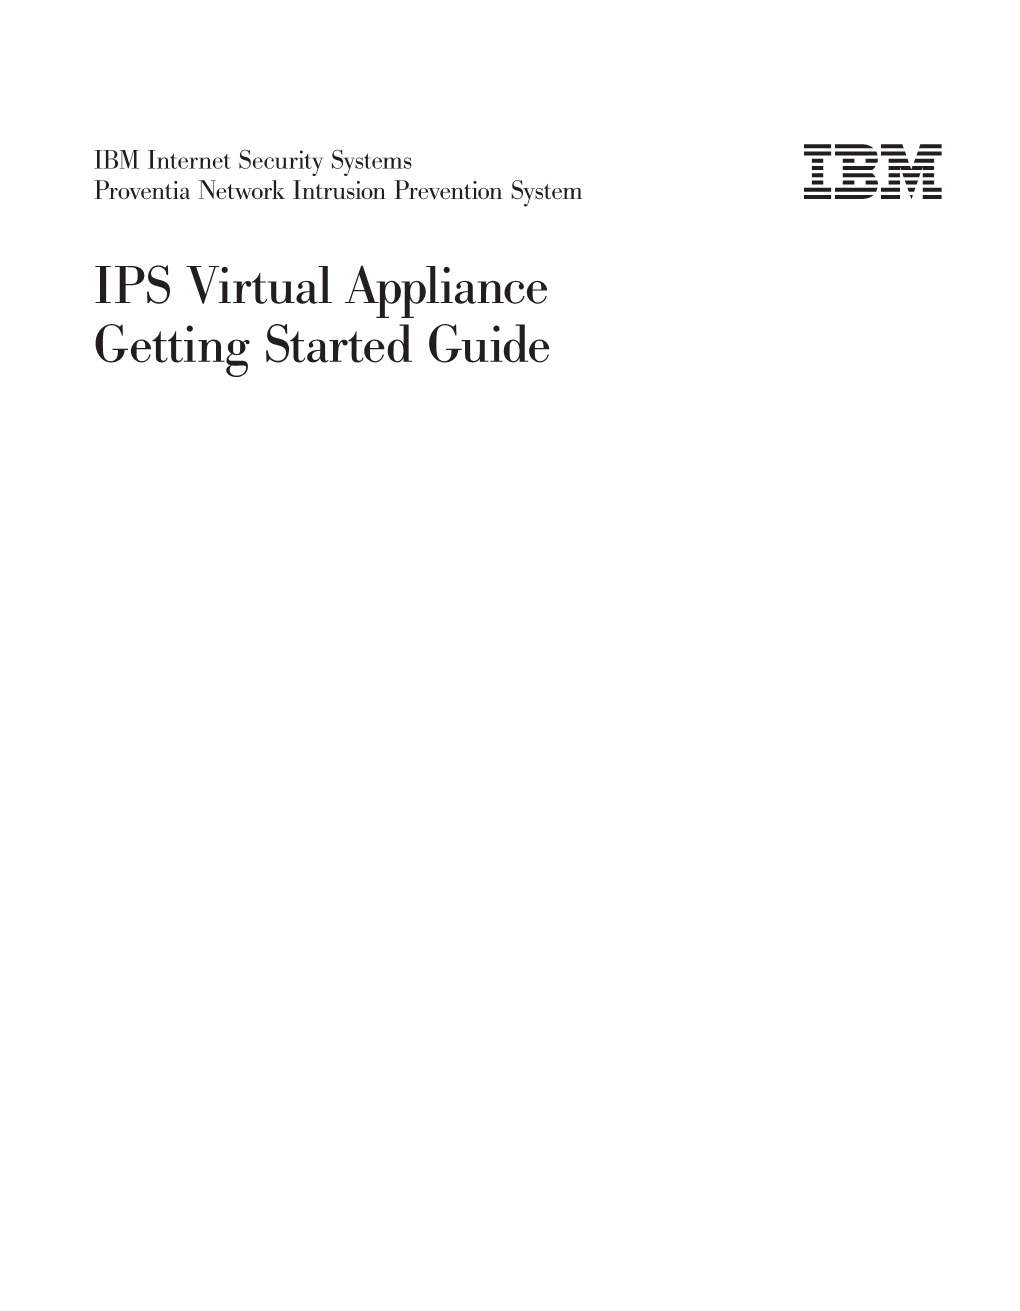 IPS Virtual Appliance Getting Started Guide: IBM Internet Security Systems Contents